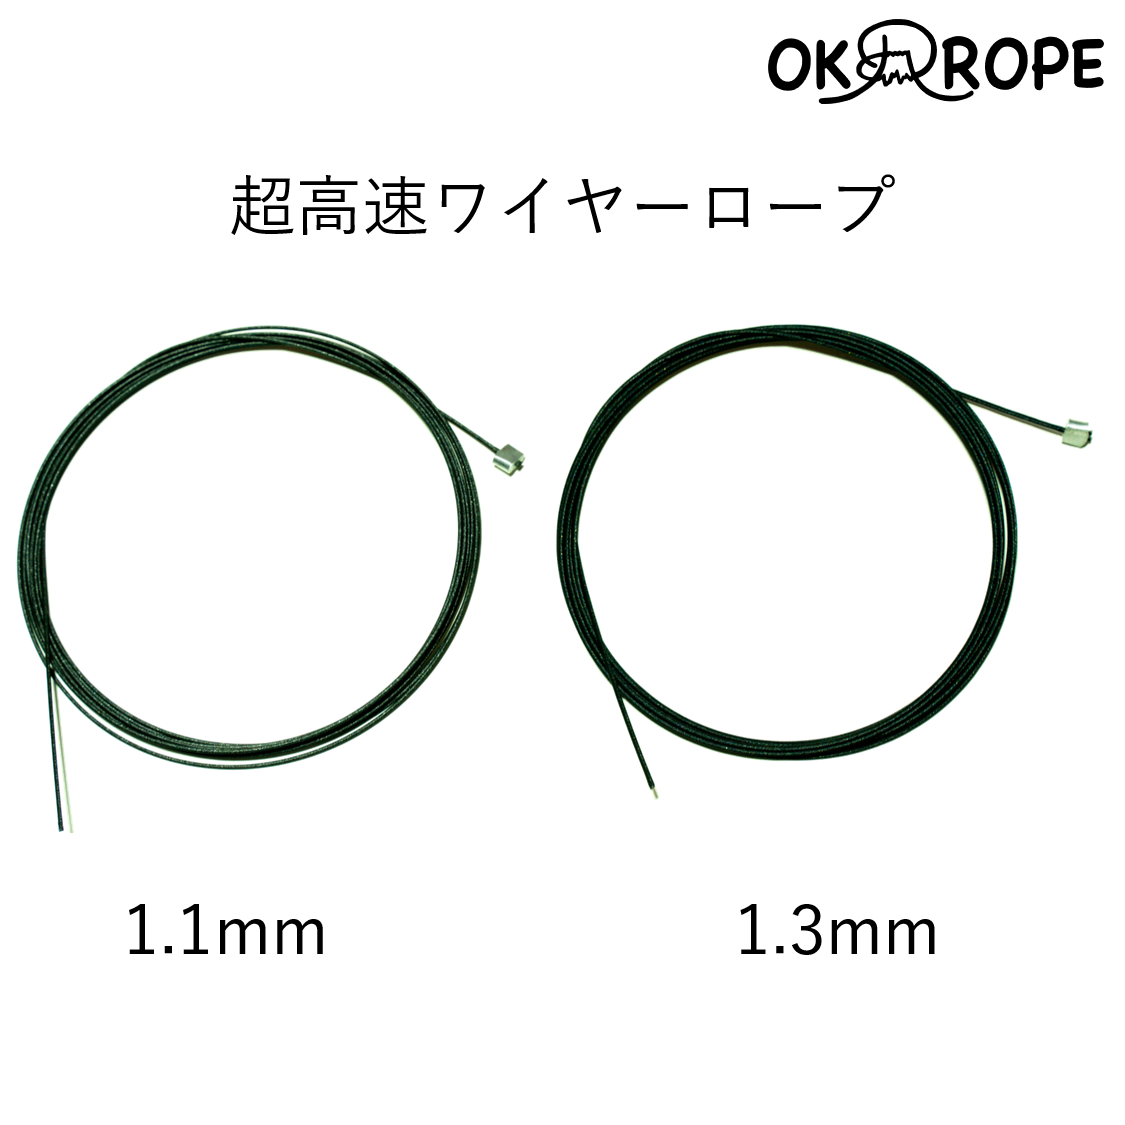 [Mid/Advanced] Replacement Cable (1.3mm/1.1mm)